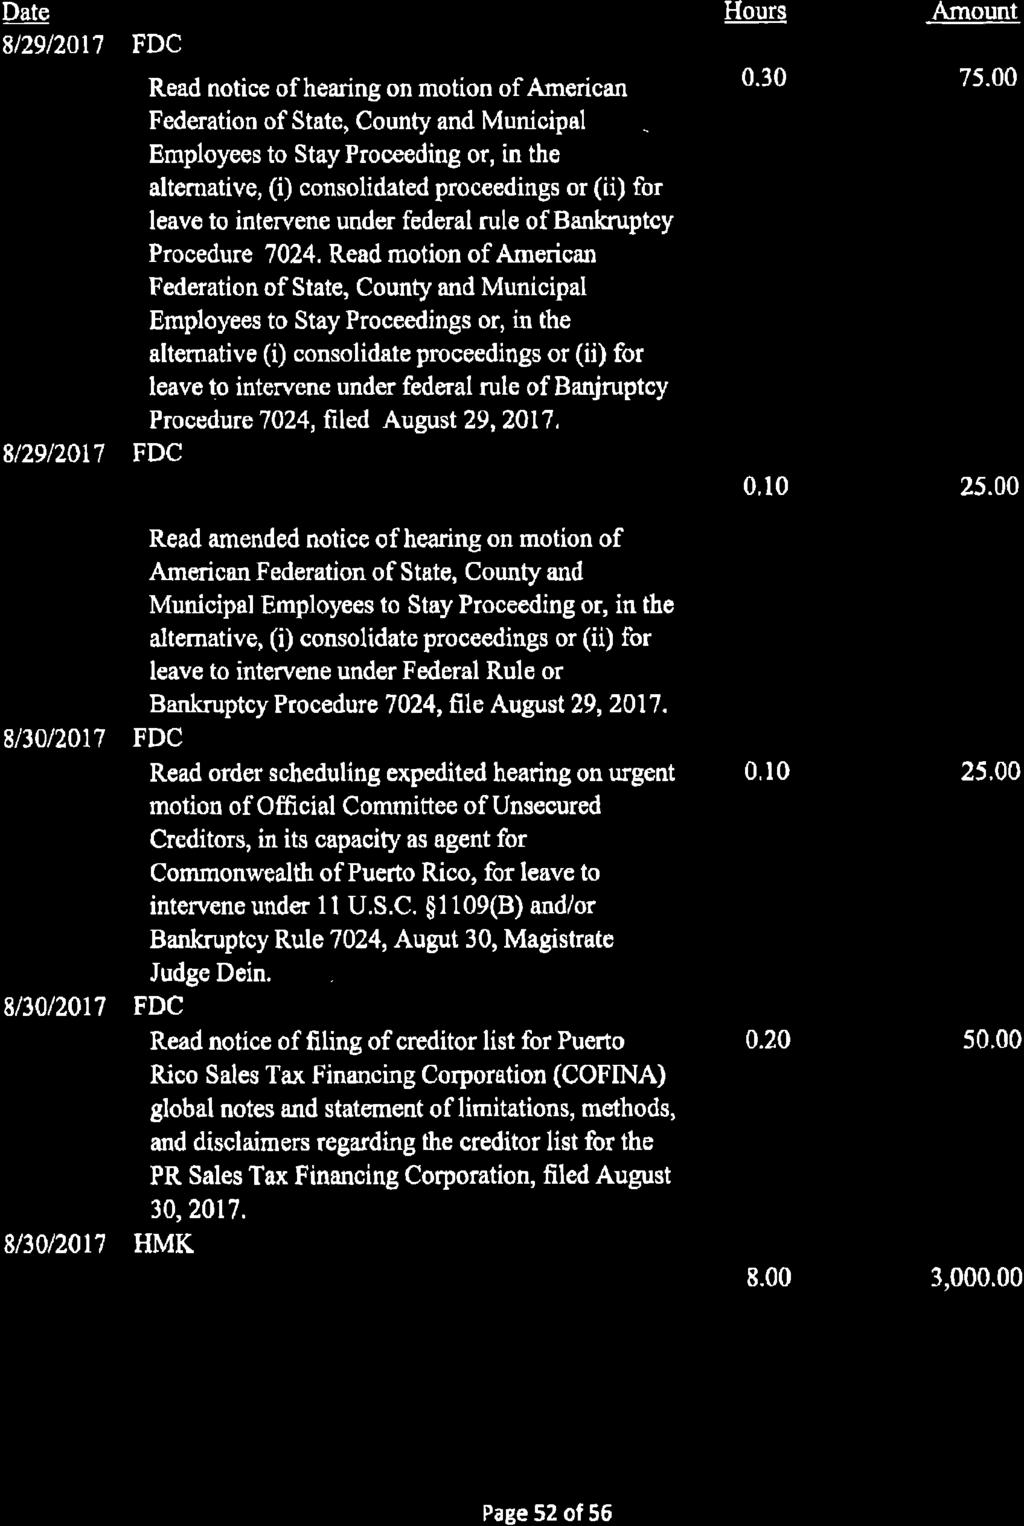 Exhibit C- Detailed Time Records Page 65 of 112 Date Attorney / Activity 8/29/2017 FDC Read notice of hearing on motion of American Federation of State, County and Municipal Employees to Stay